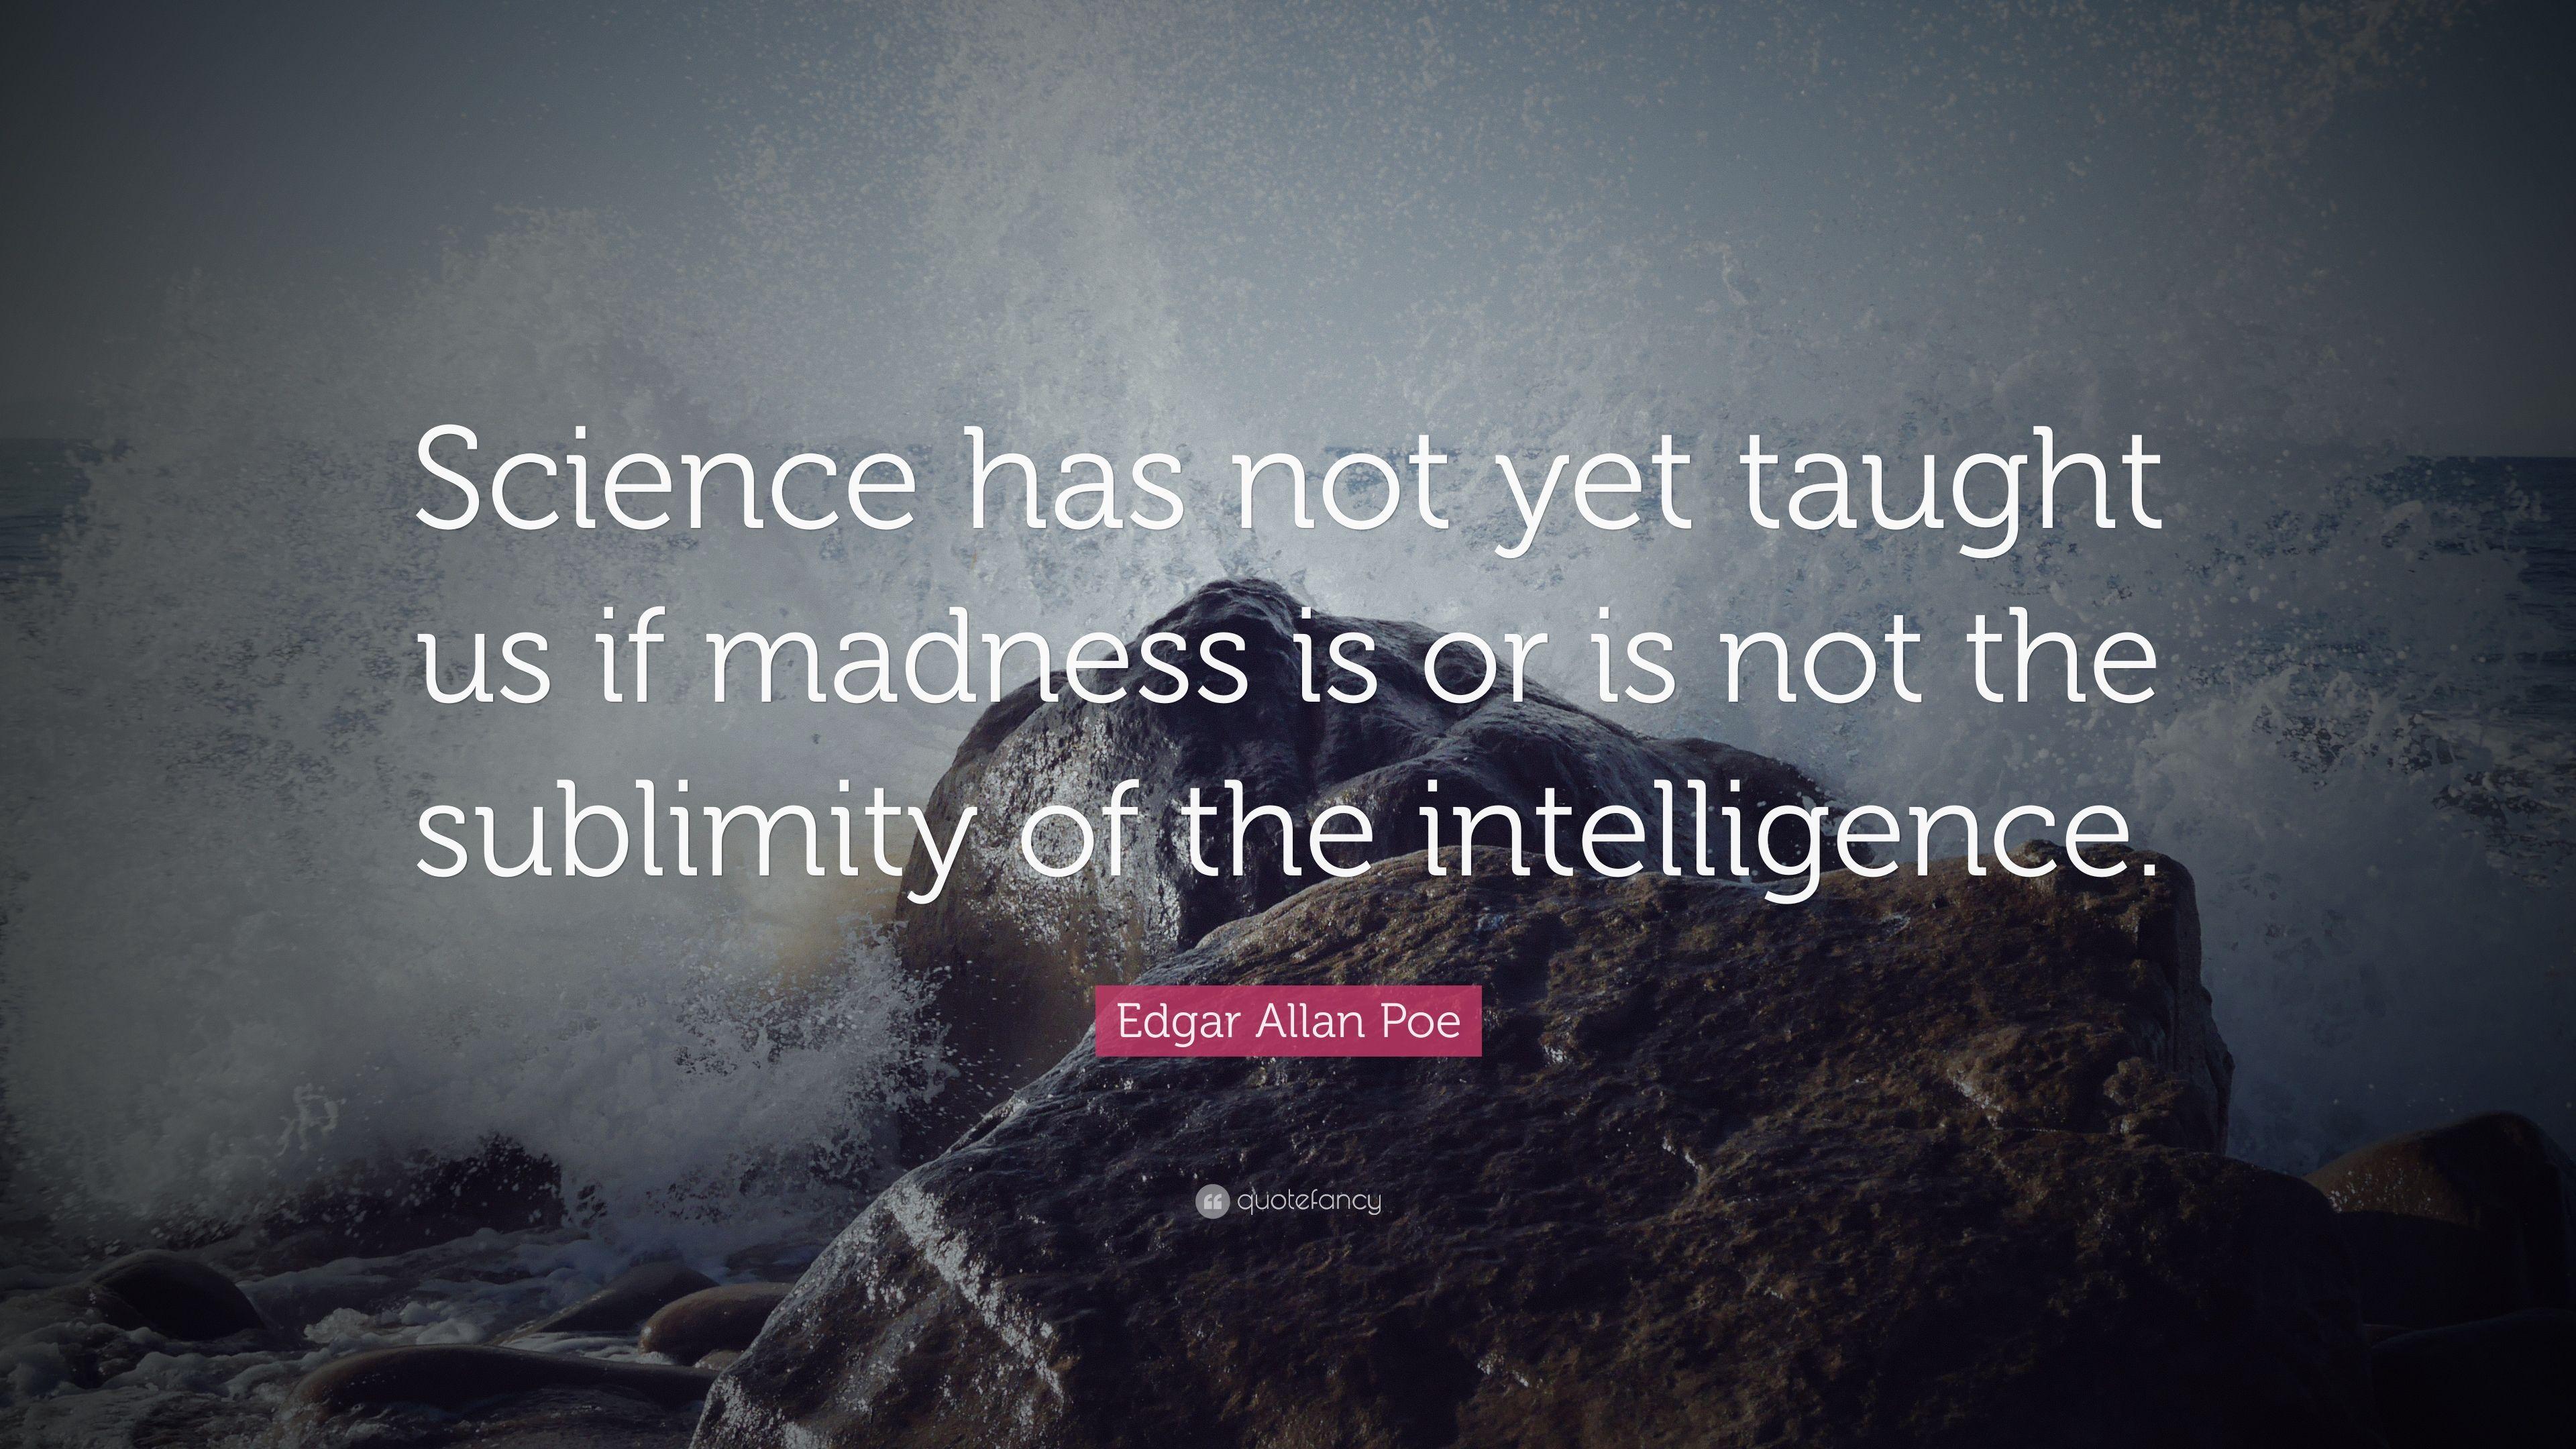 Edgar Allan Poe Quote: “Science has not yet taught us if madness